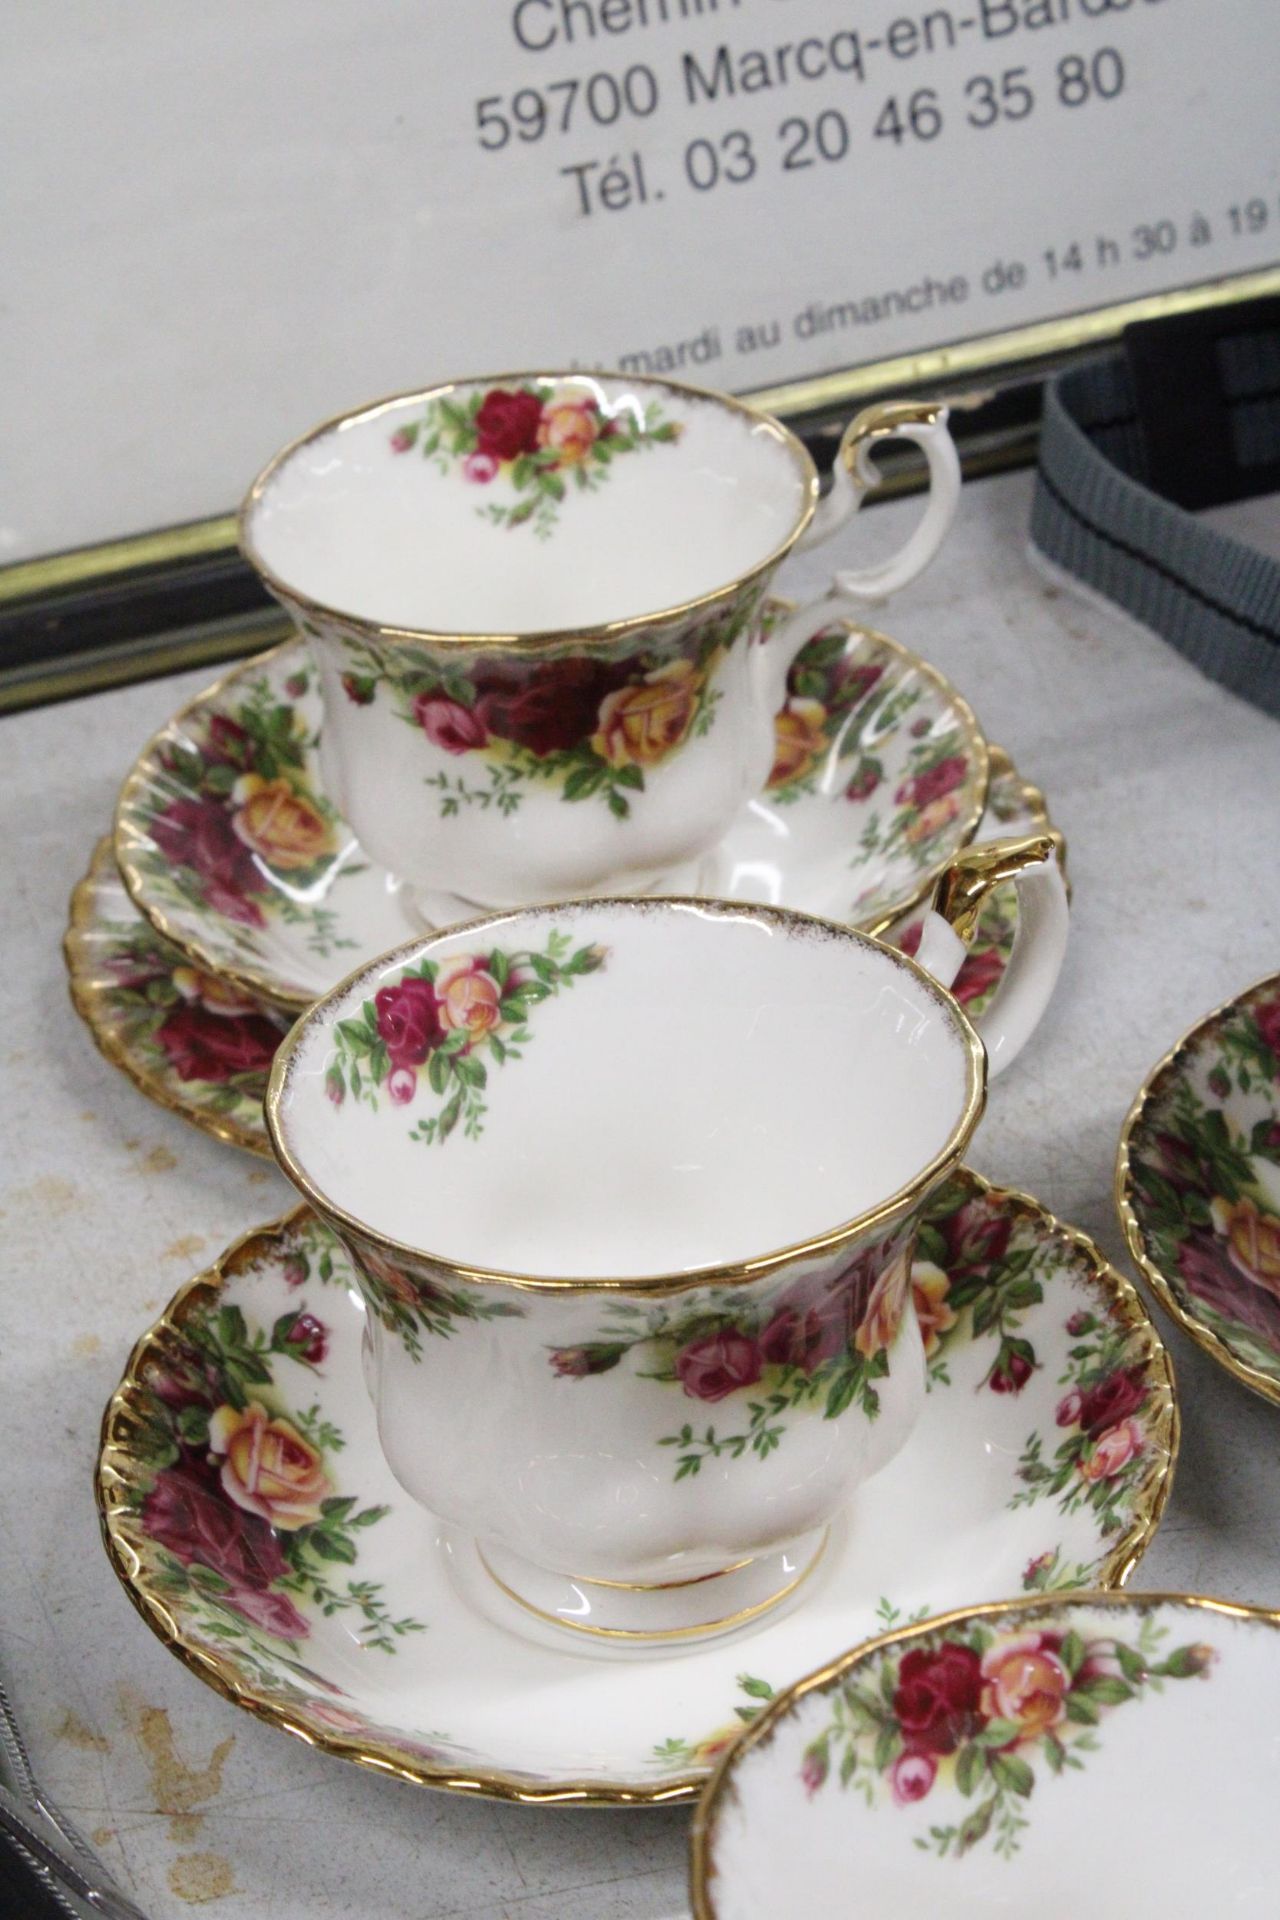 A QUANTITY OF ROYAL ALBERT 'OLD COUNTRY ROSES' TO INCLUDE CUPS, SAUCERS, A CREAM JUG AND SUGAR BOWL - Image 5 of 6